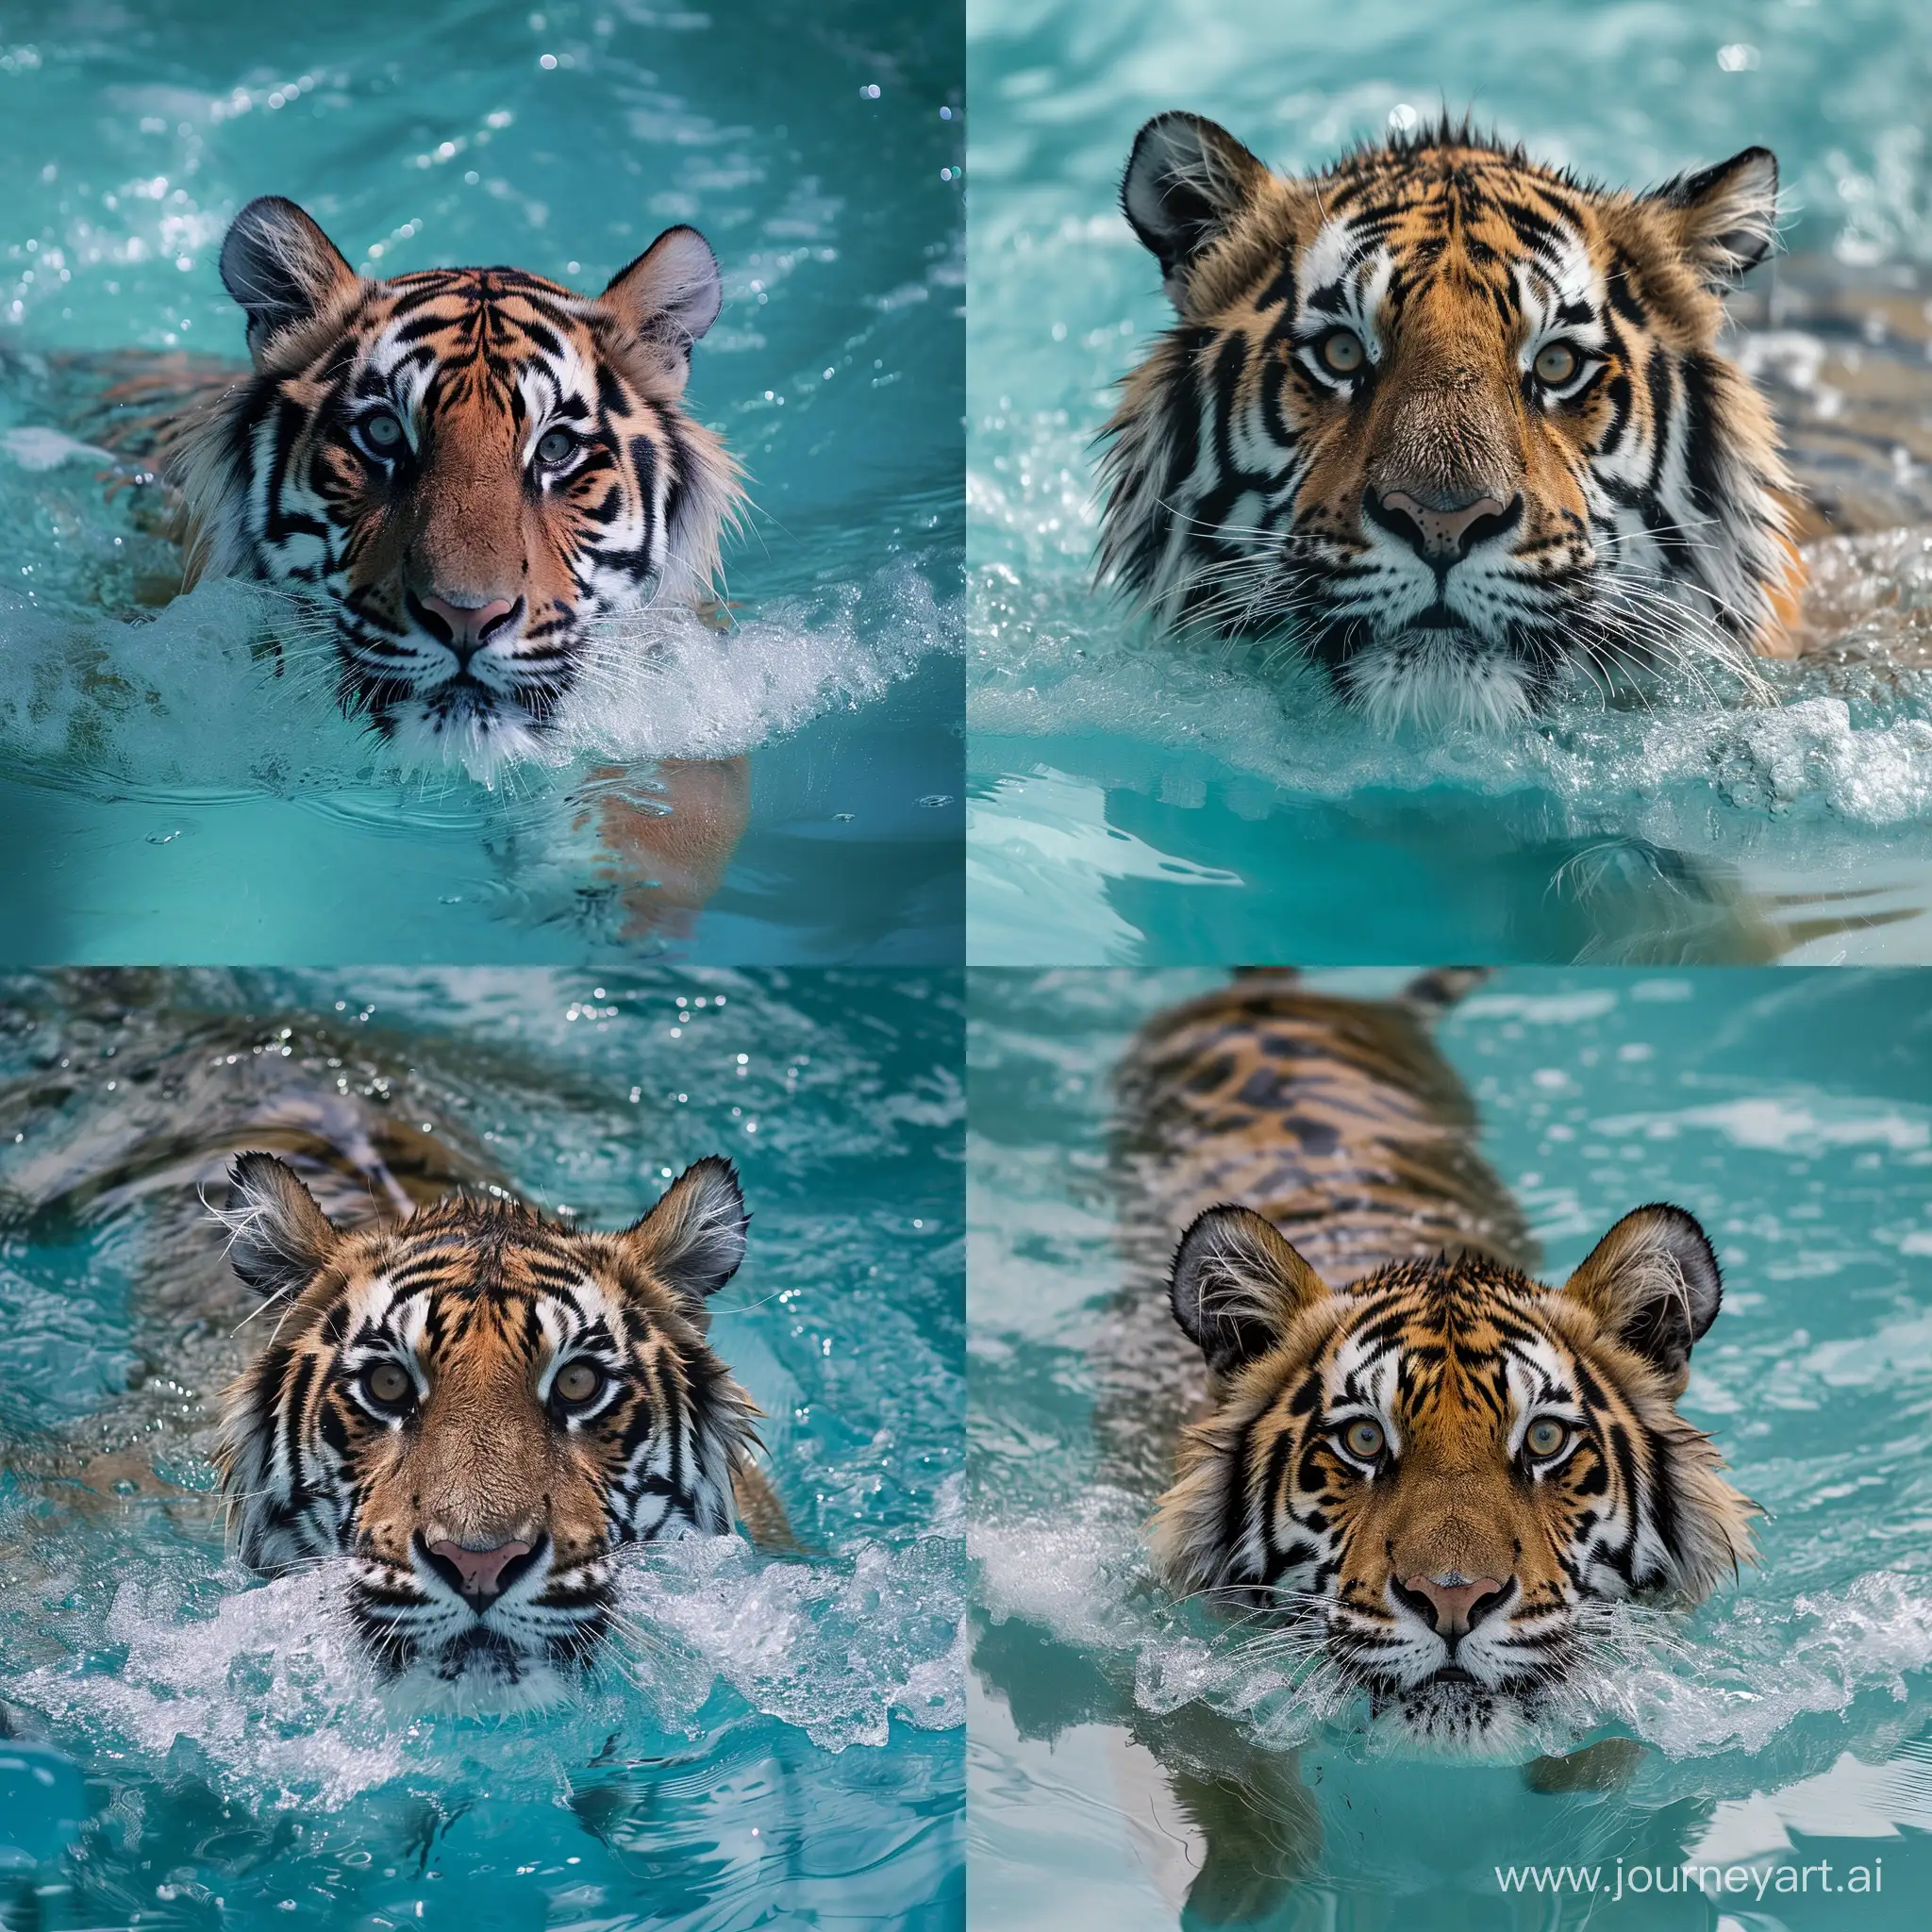 Tiger swims in the pool